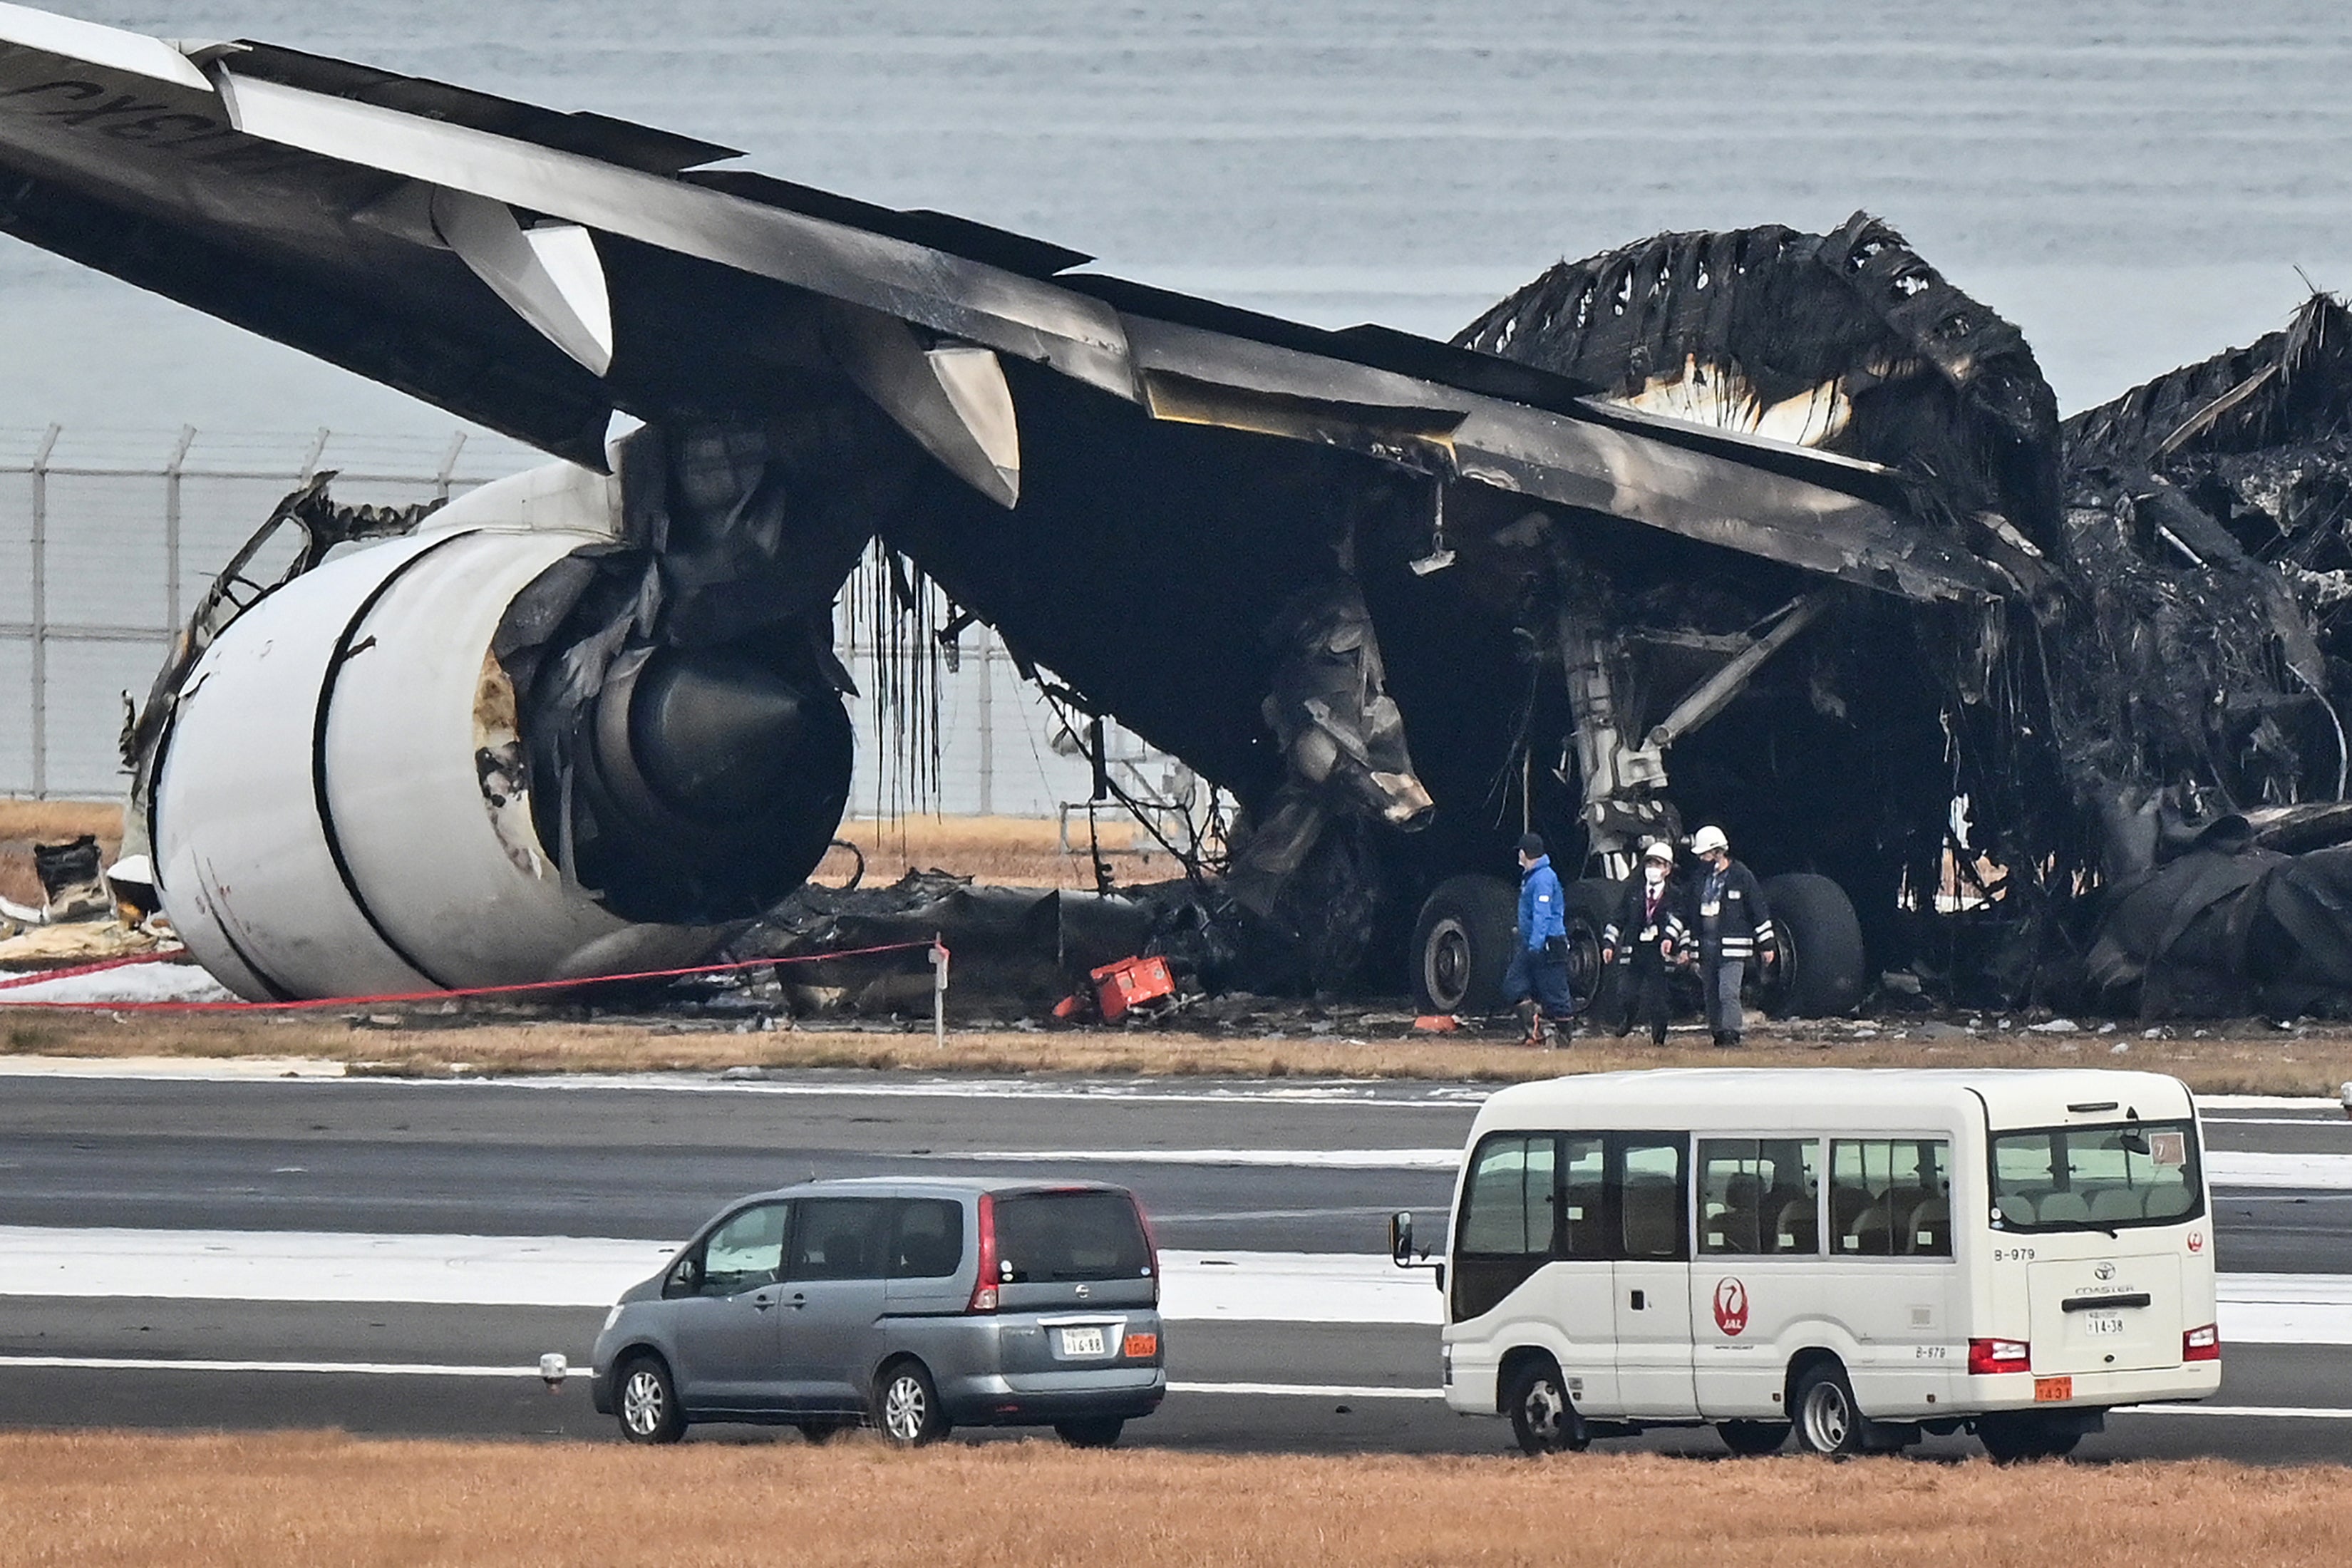 Officials look at the burnt wreckage of a Japan Airlines (JAL) passenger plane on the tarmac